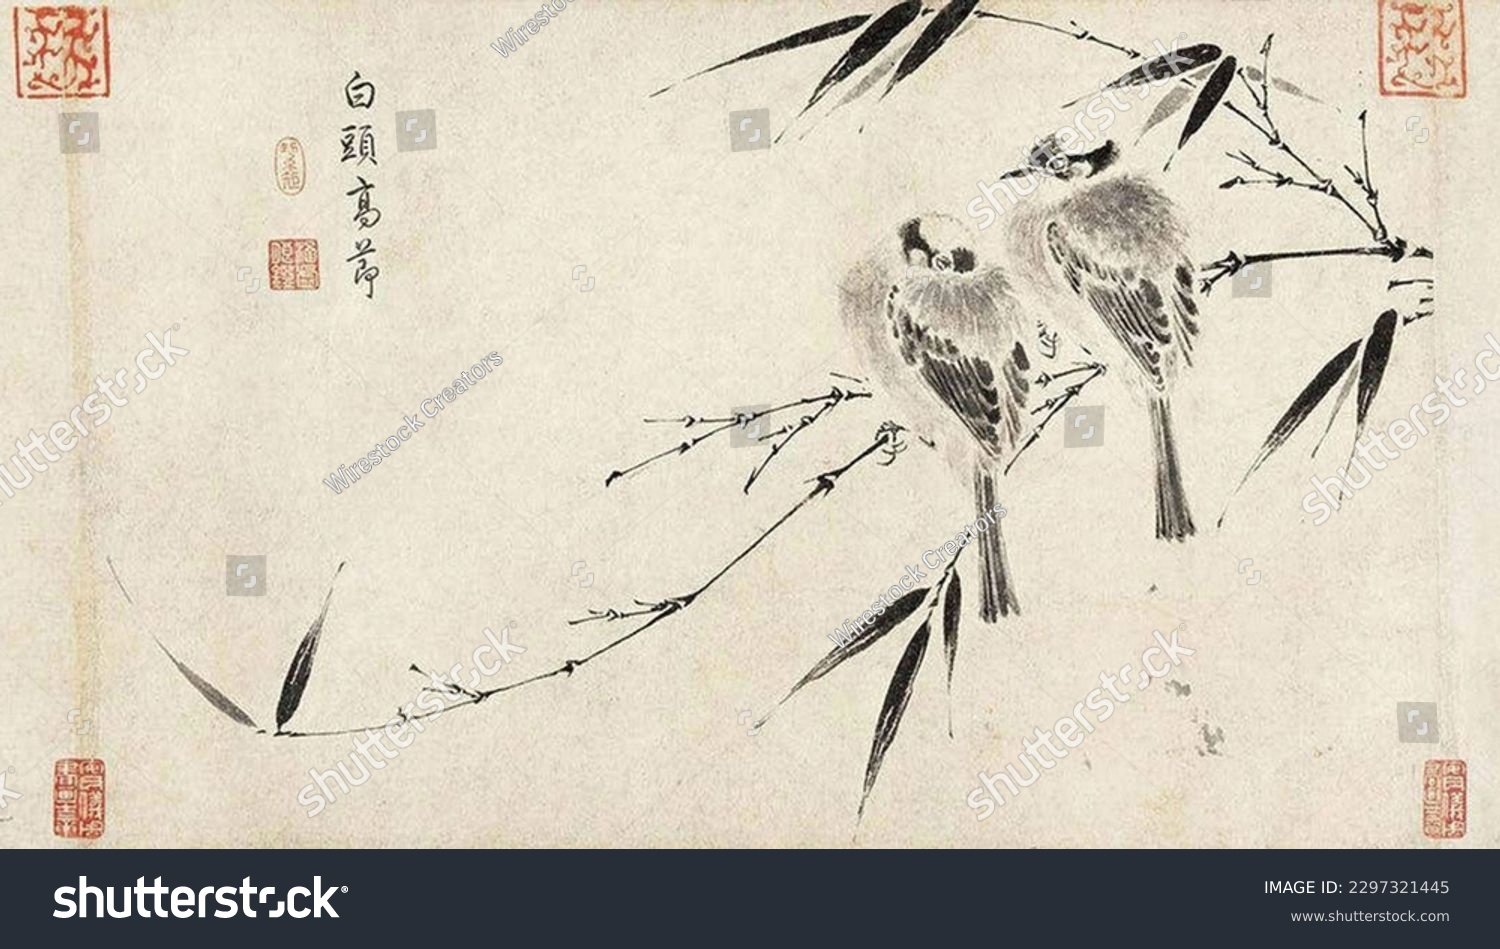 BEIJING, CN - Jun 01, 2022: An ancient Chinese song dynasty paintings #2297321445